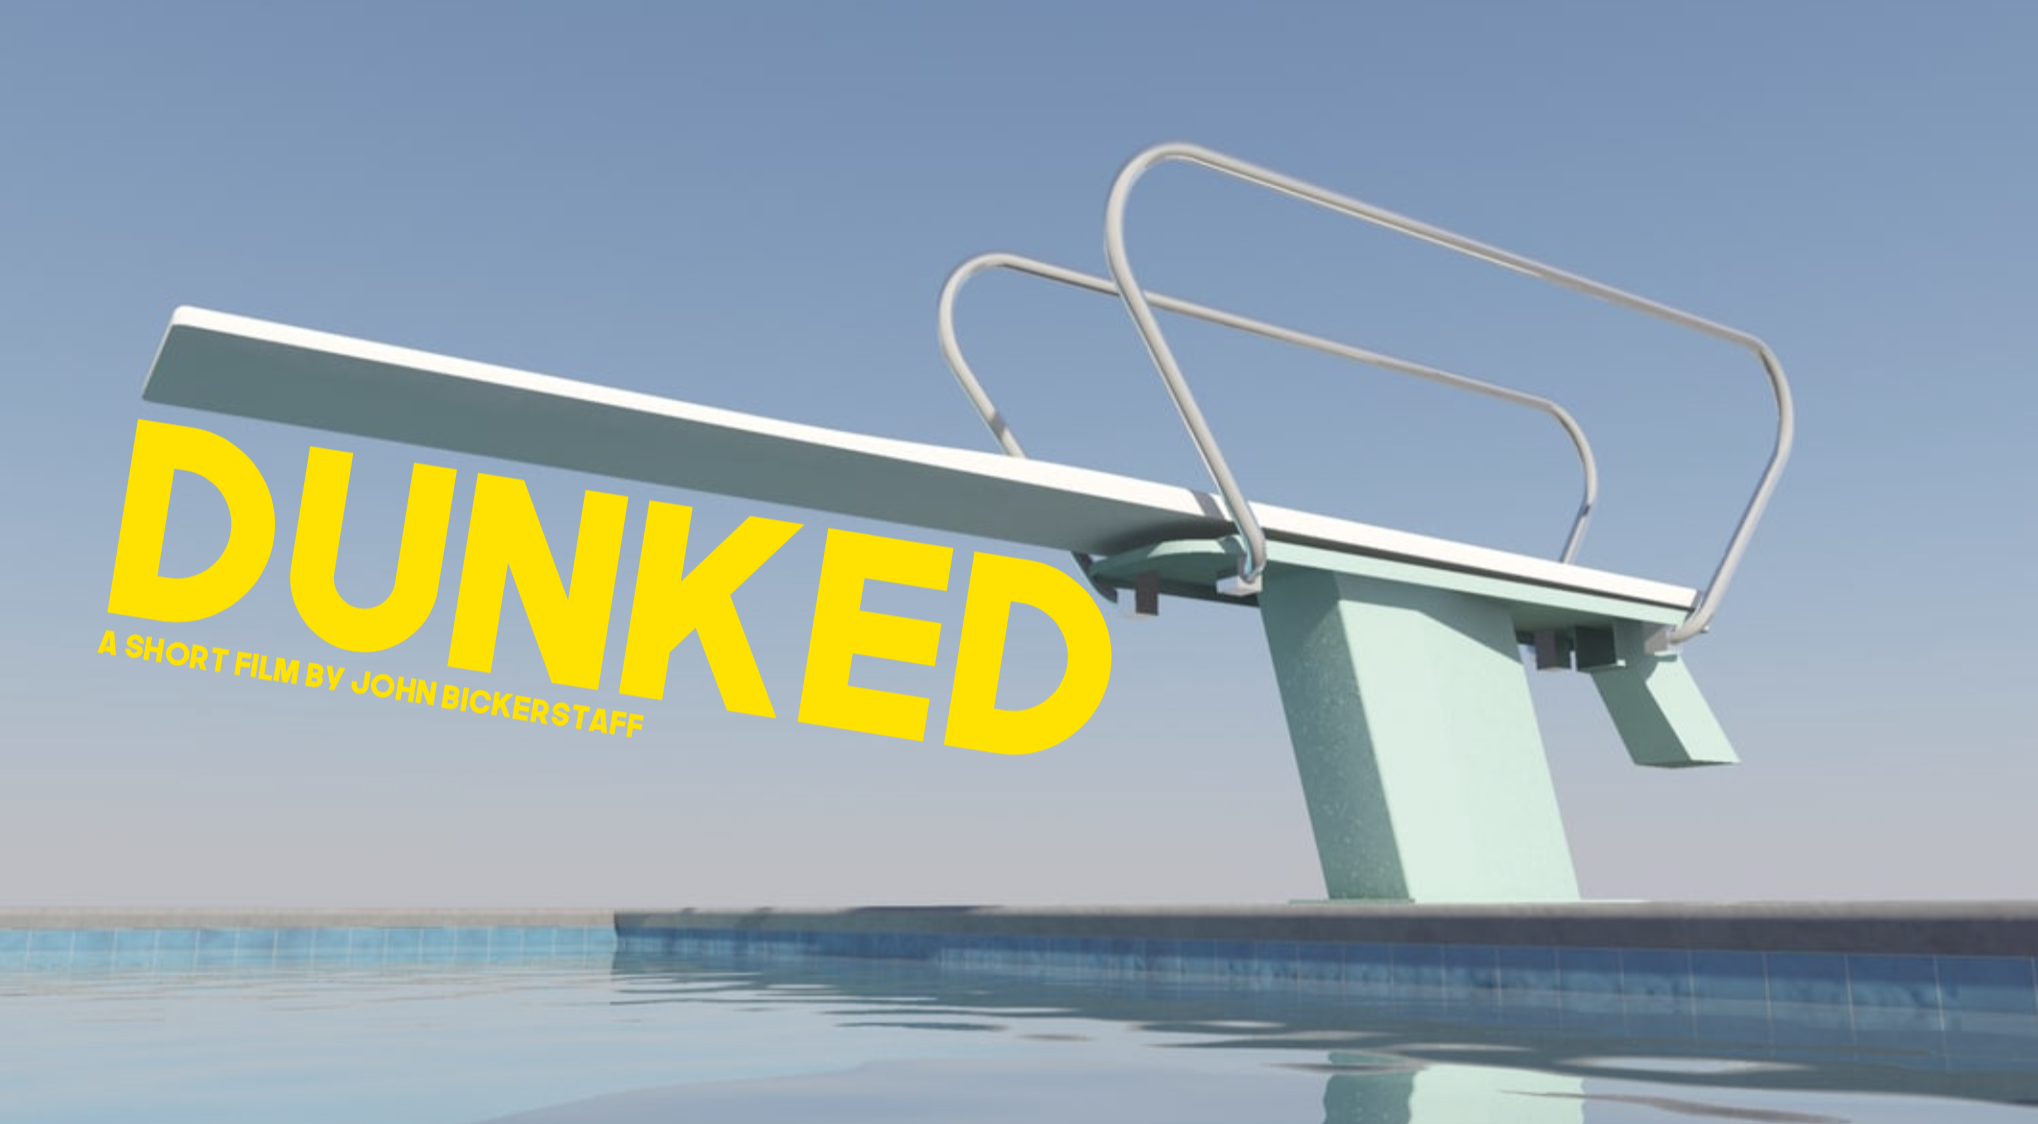 Diving board with the title "Dunked" written below in a bold yellow font.